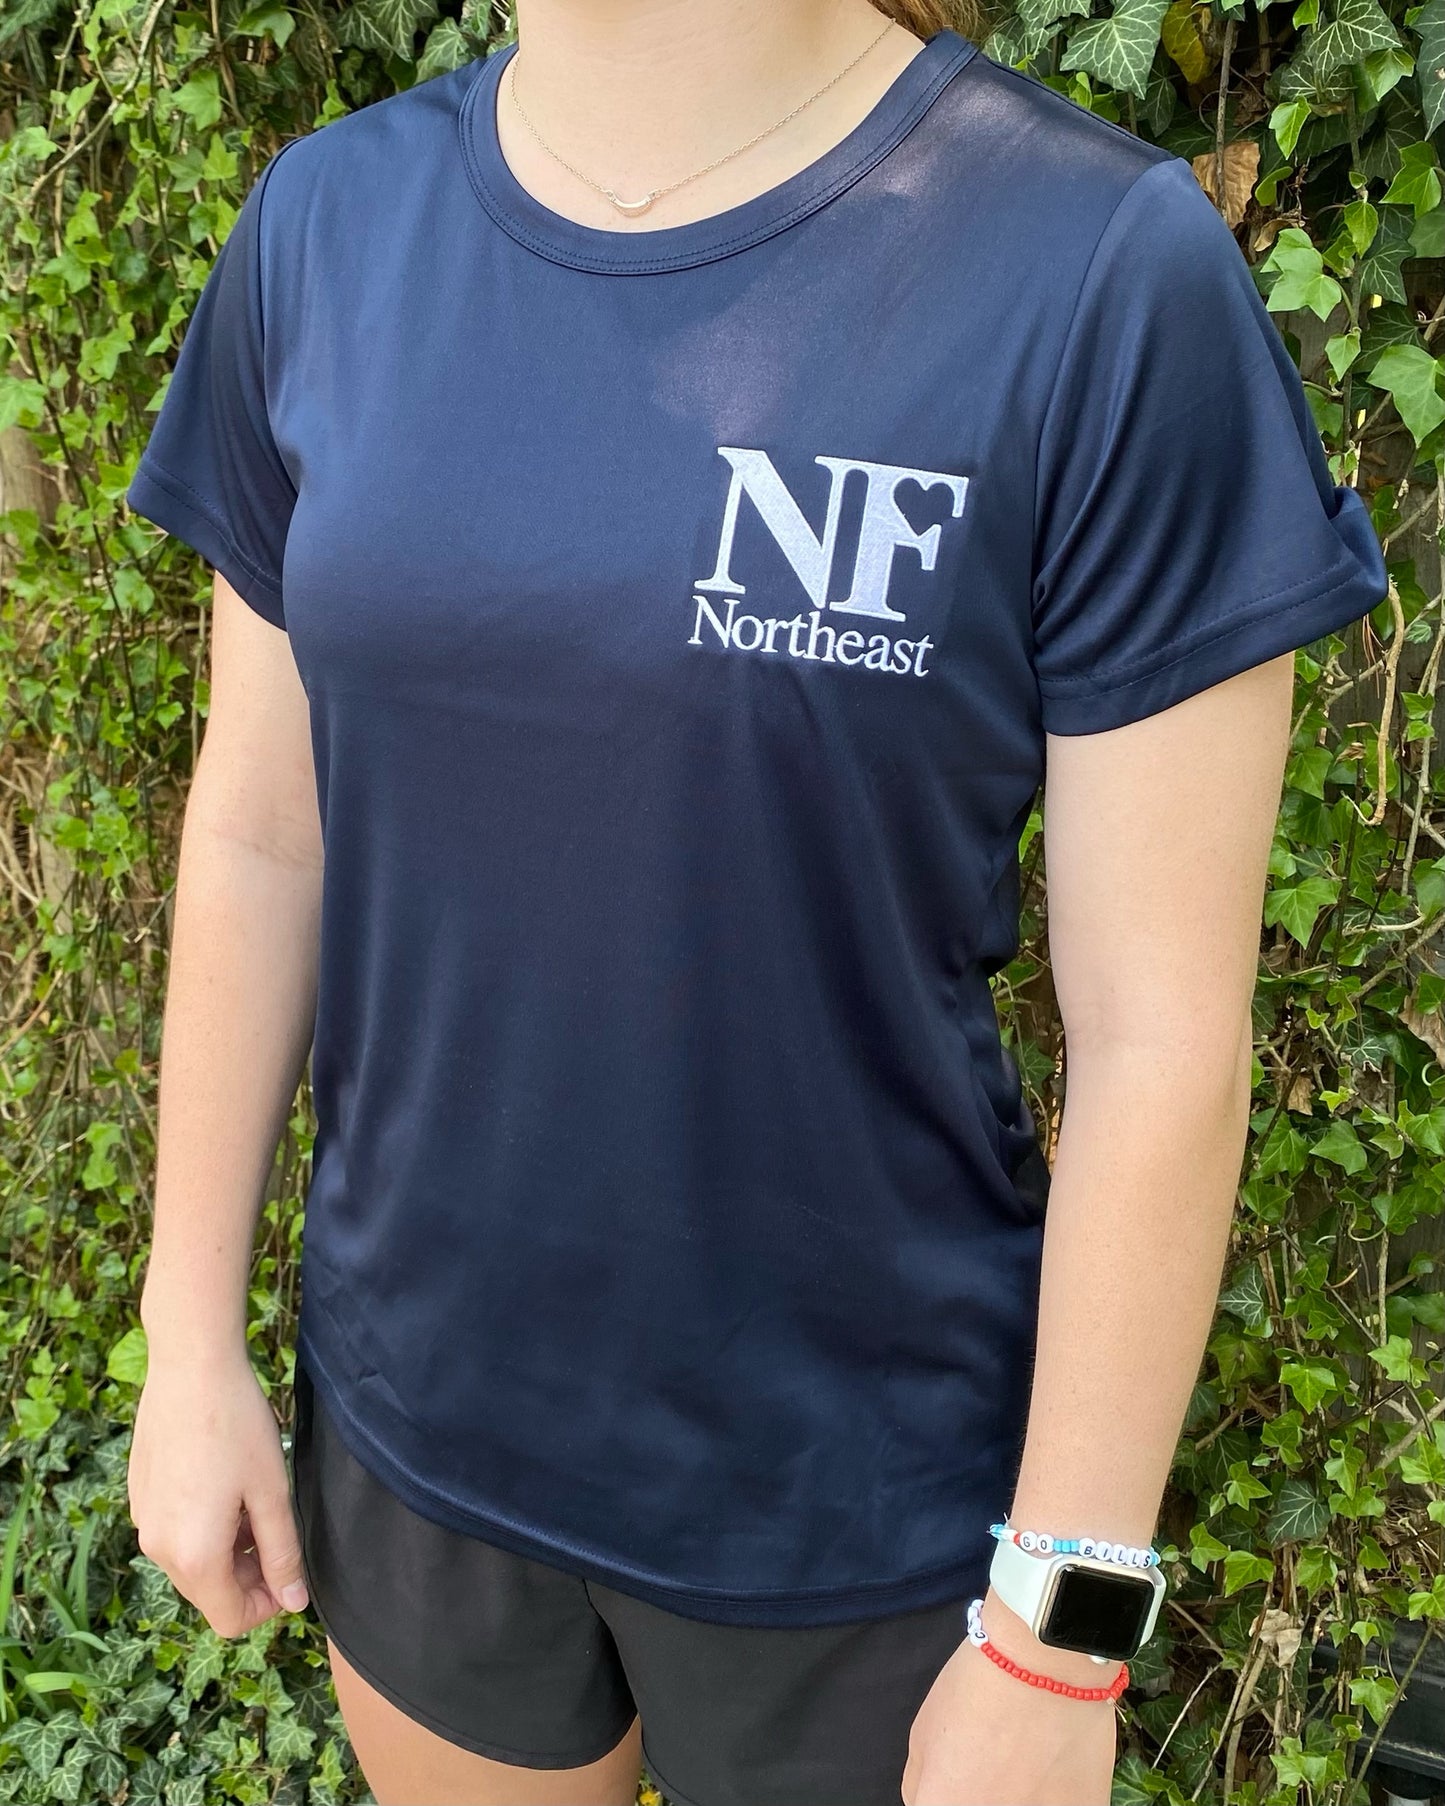 side view of navy dri-fit t-shirt with NF Northeast logo embroidered in white on left chest